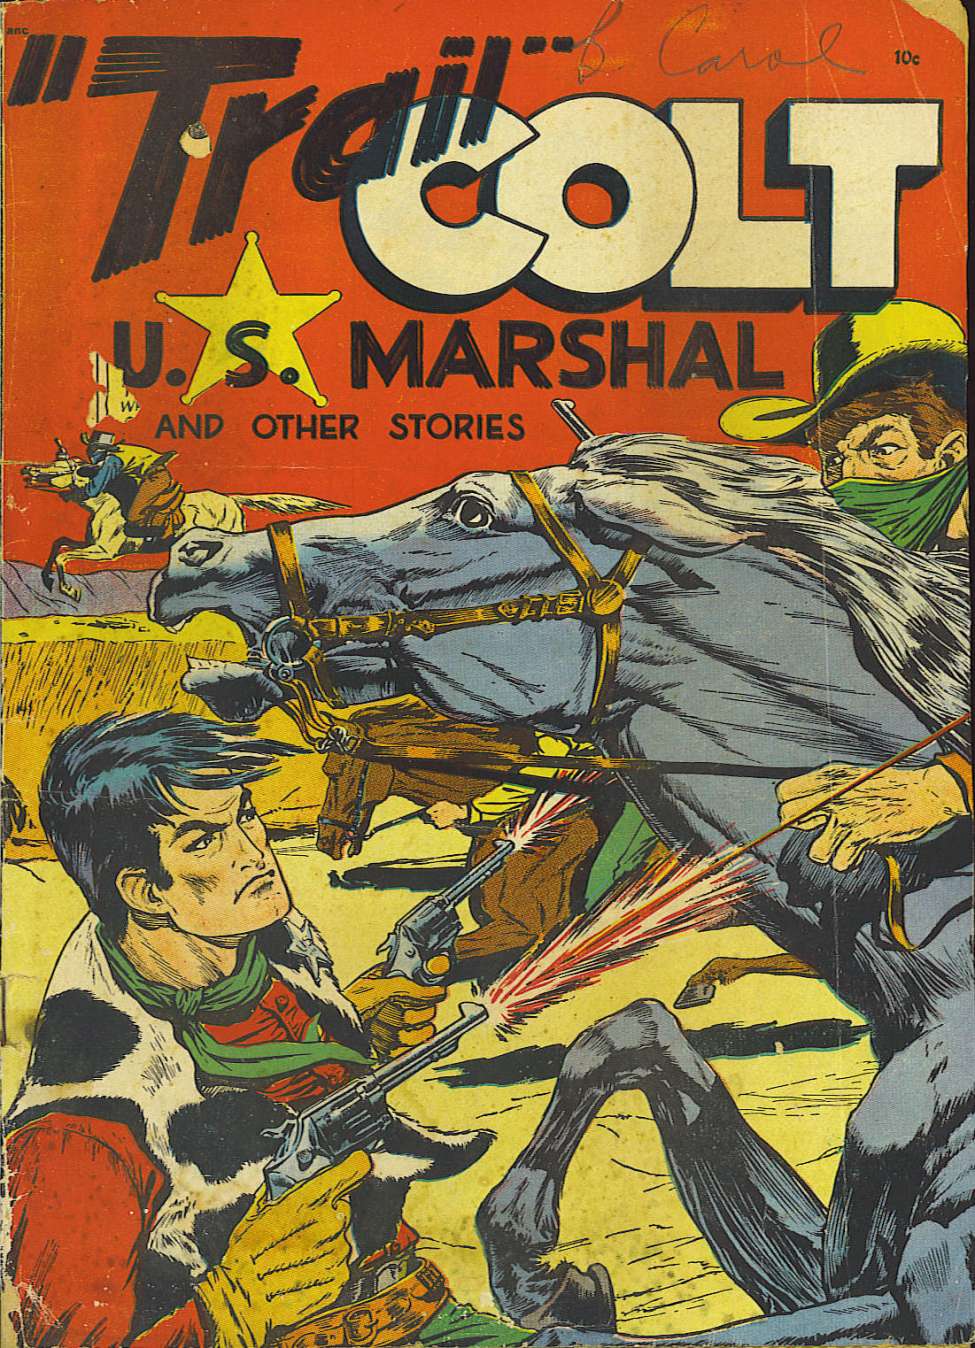 Book Cover For Trail Colt 1 (A-1 24)